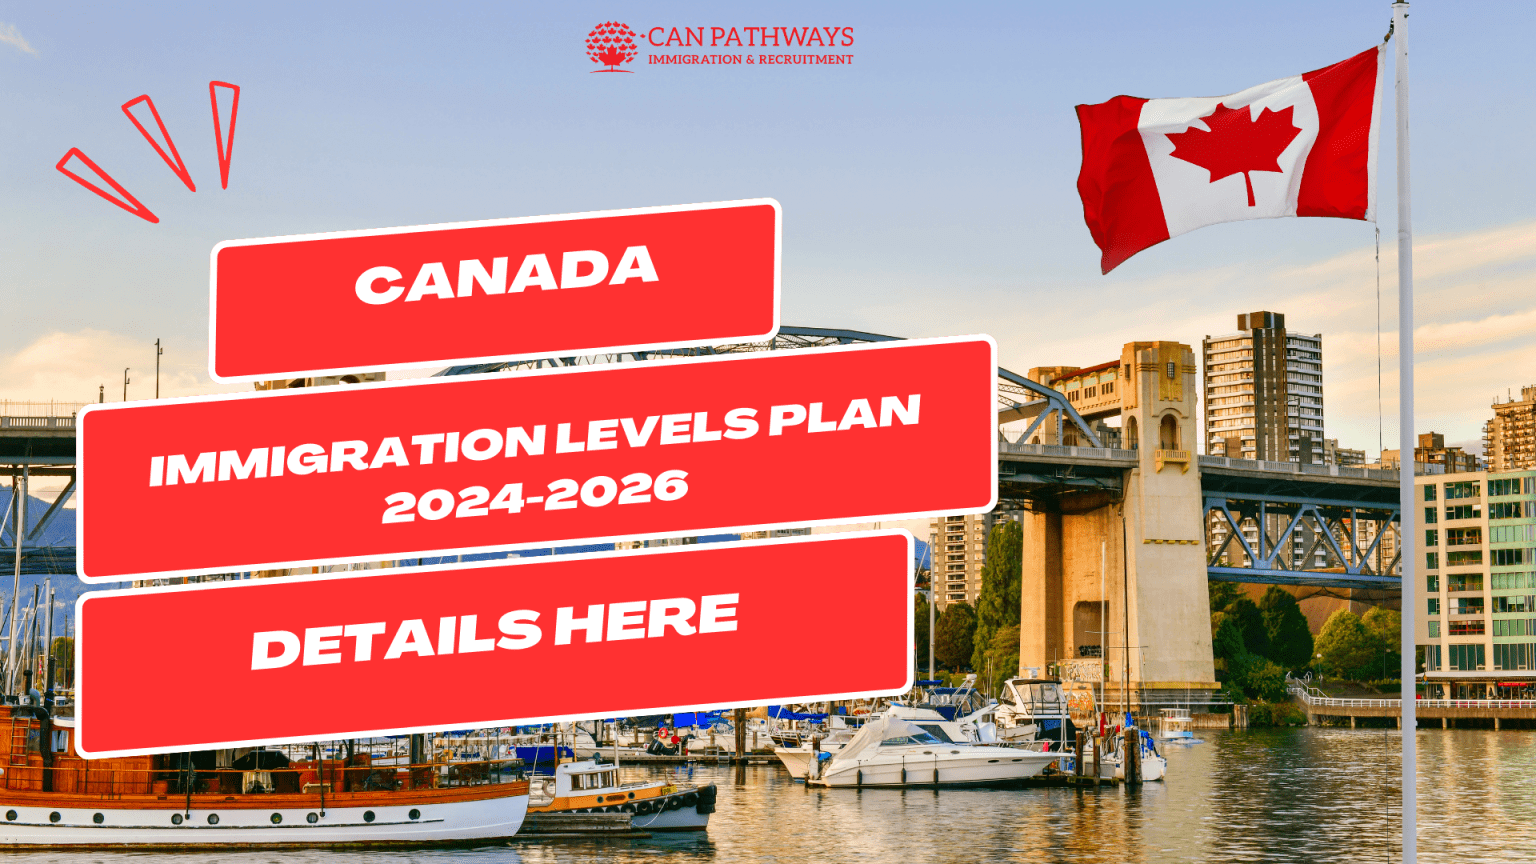 Canada Immigration Levels Plan 20242026 Details Here CAN Pathways